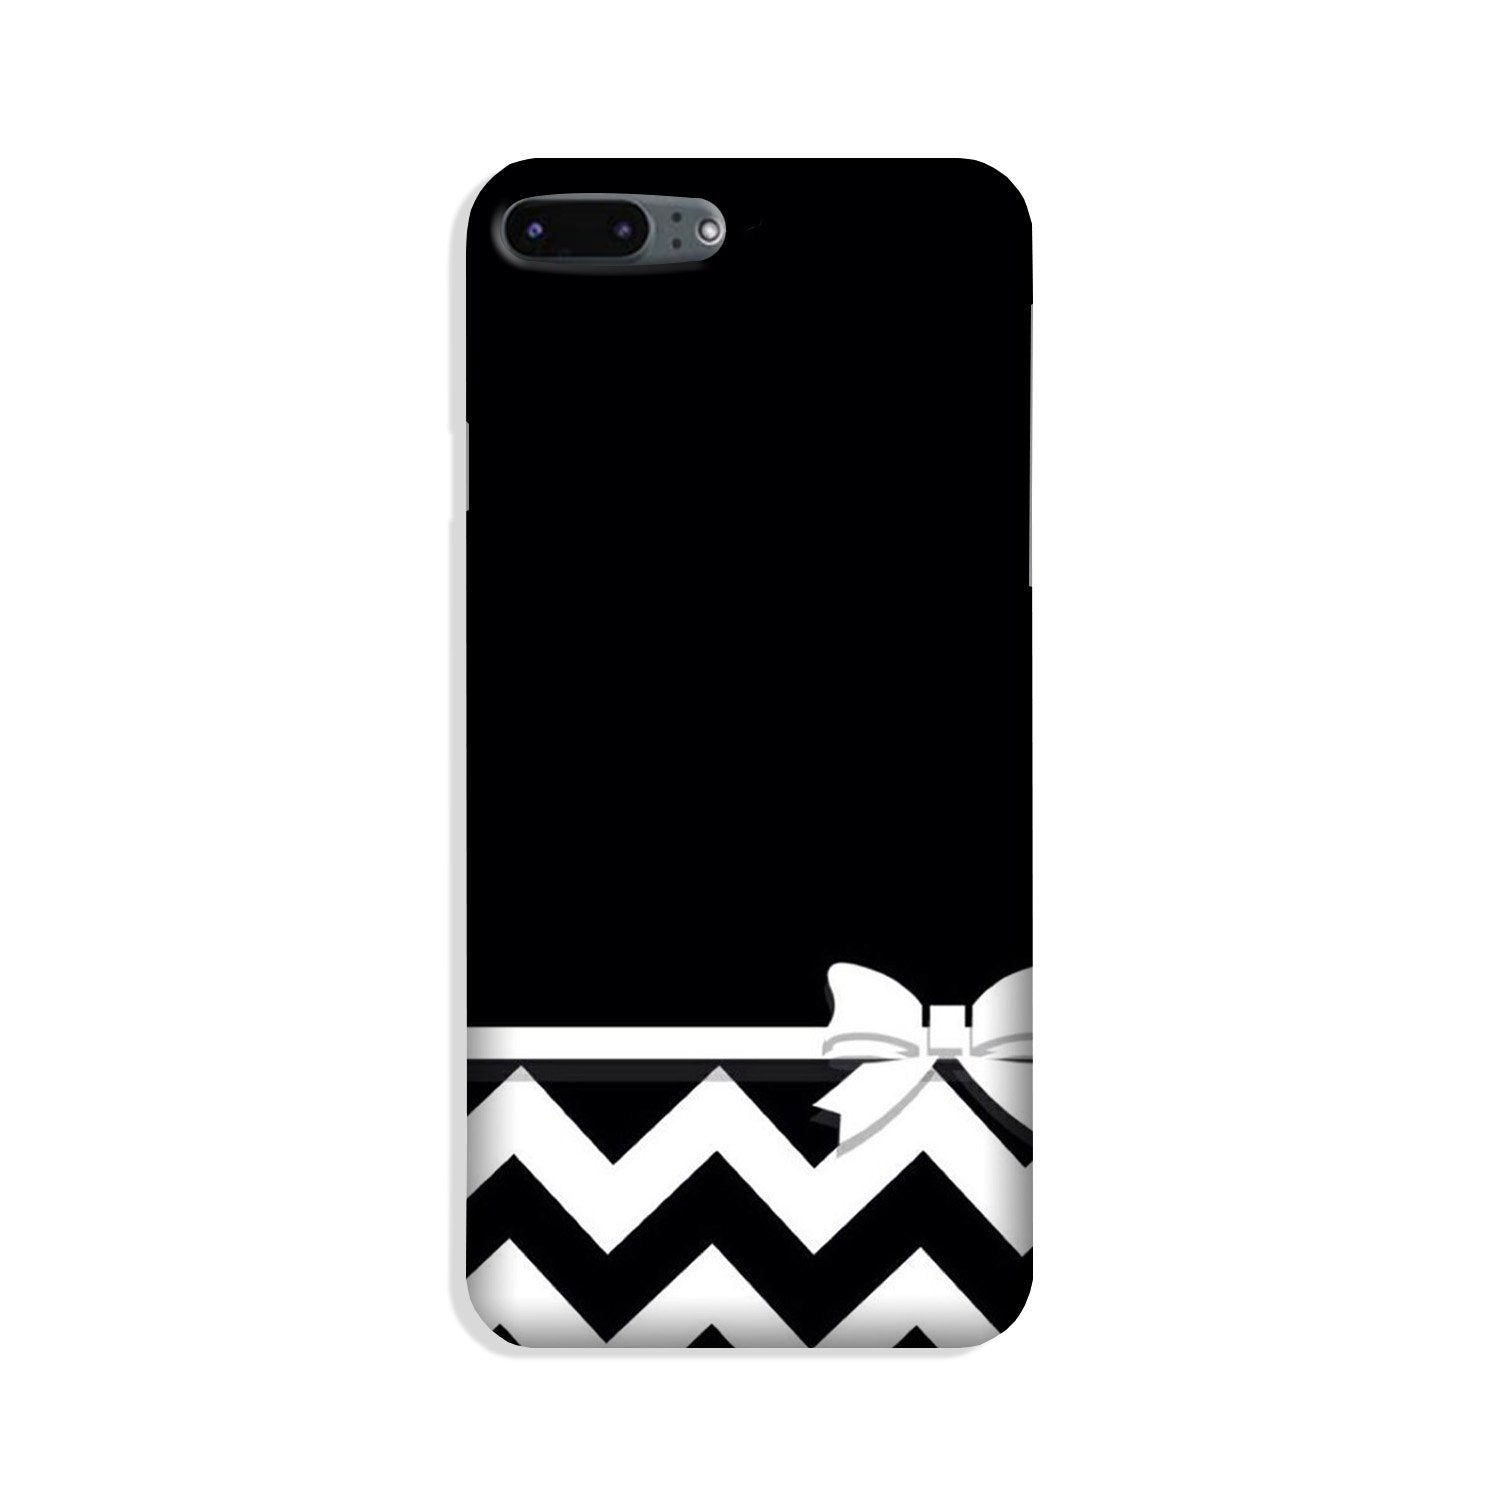 Gift Wrap7 Case for iPhone 8 Plus